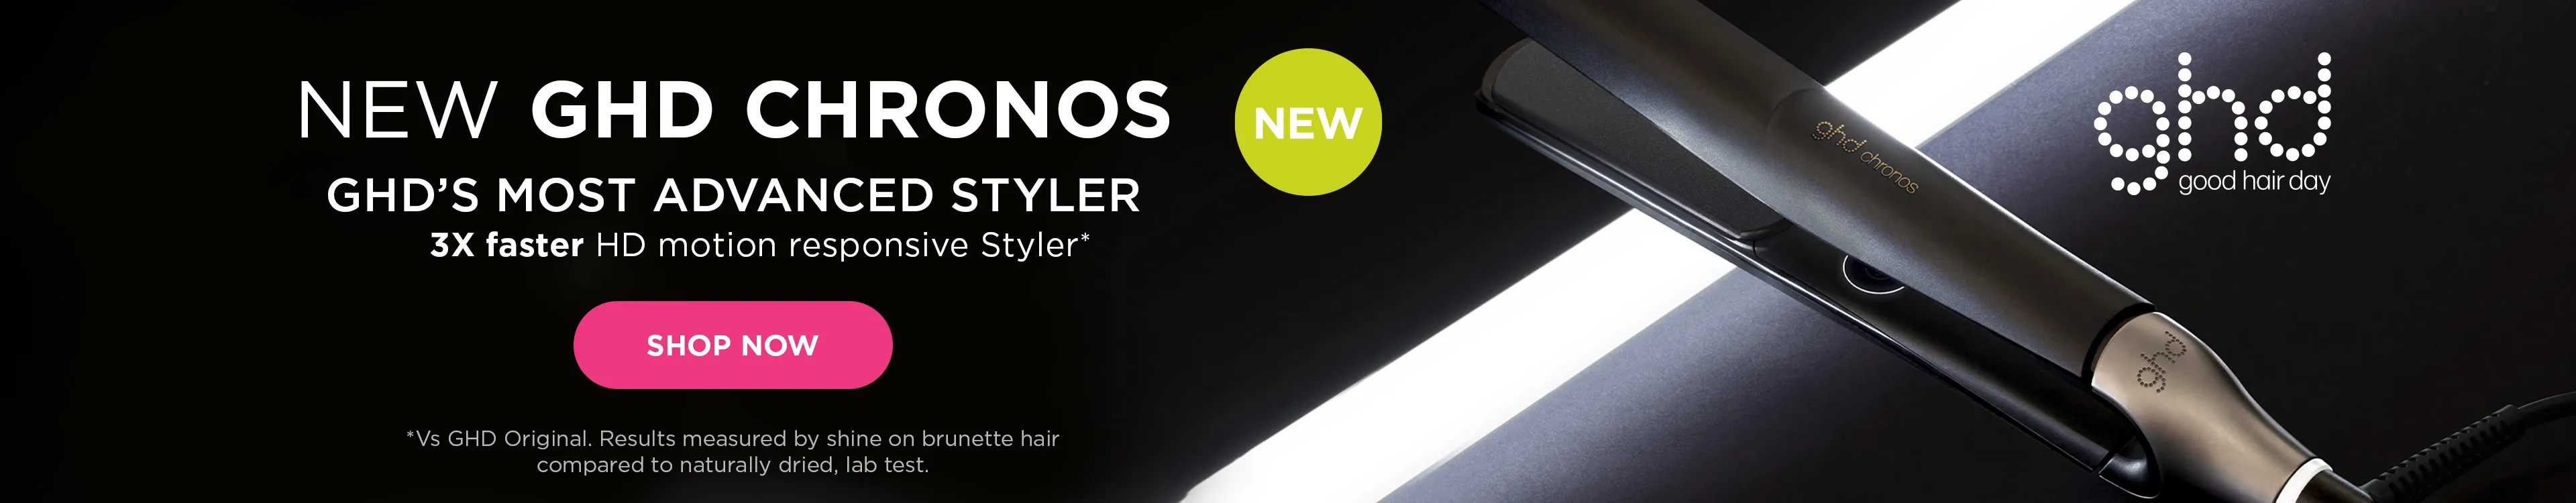 Enjoy 3x faster styling* with the new GHD Chronos Hair Styler